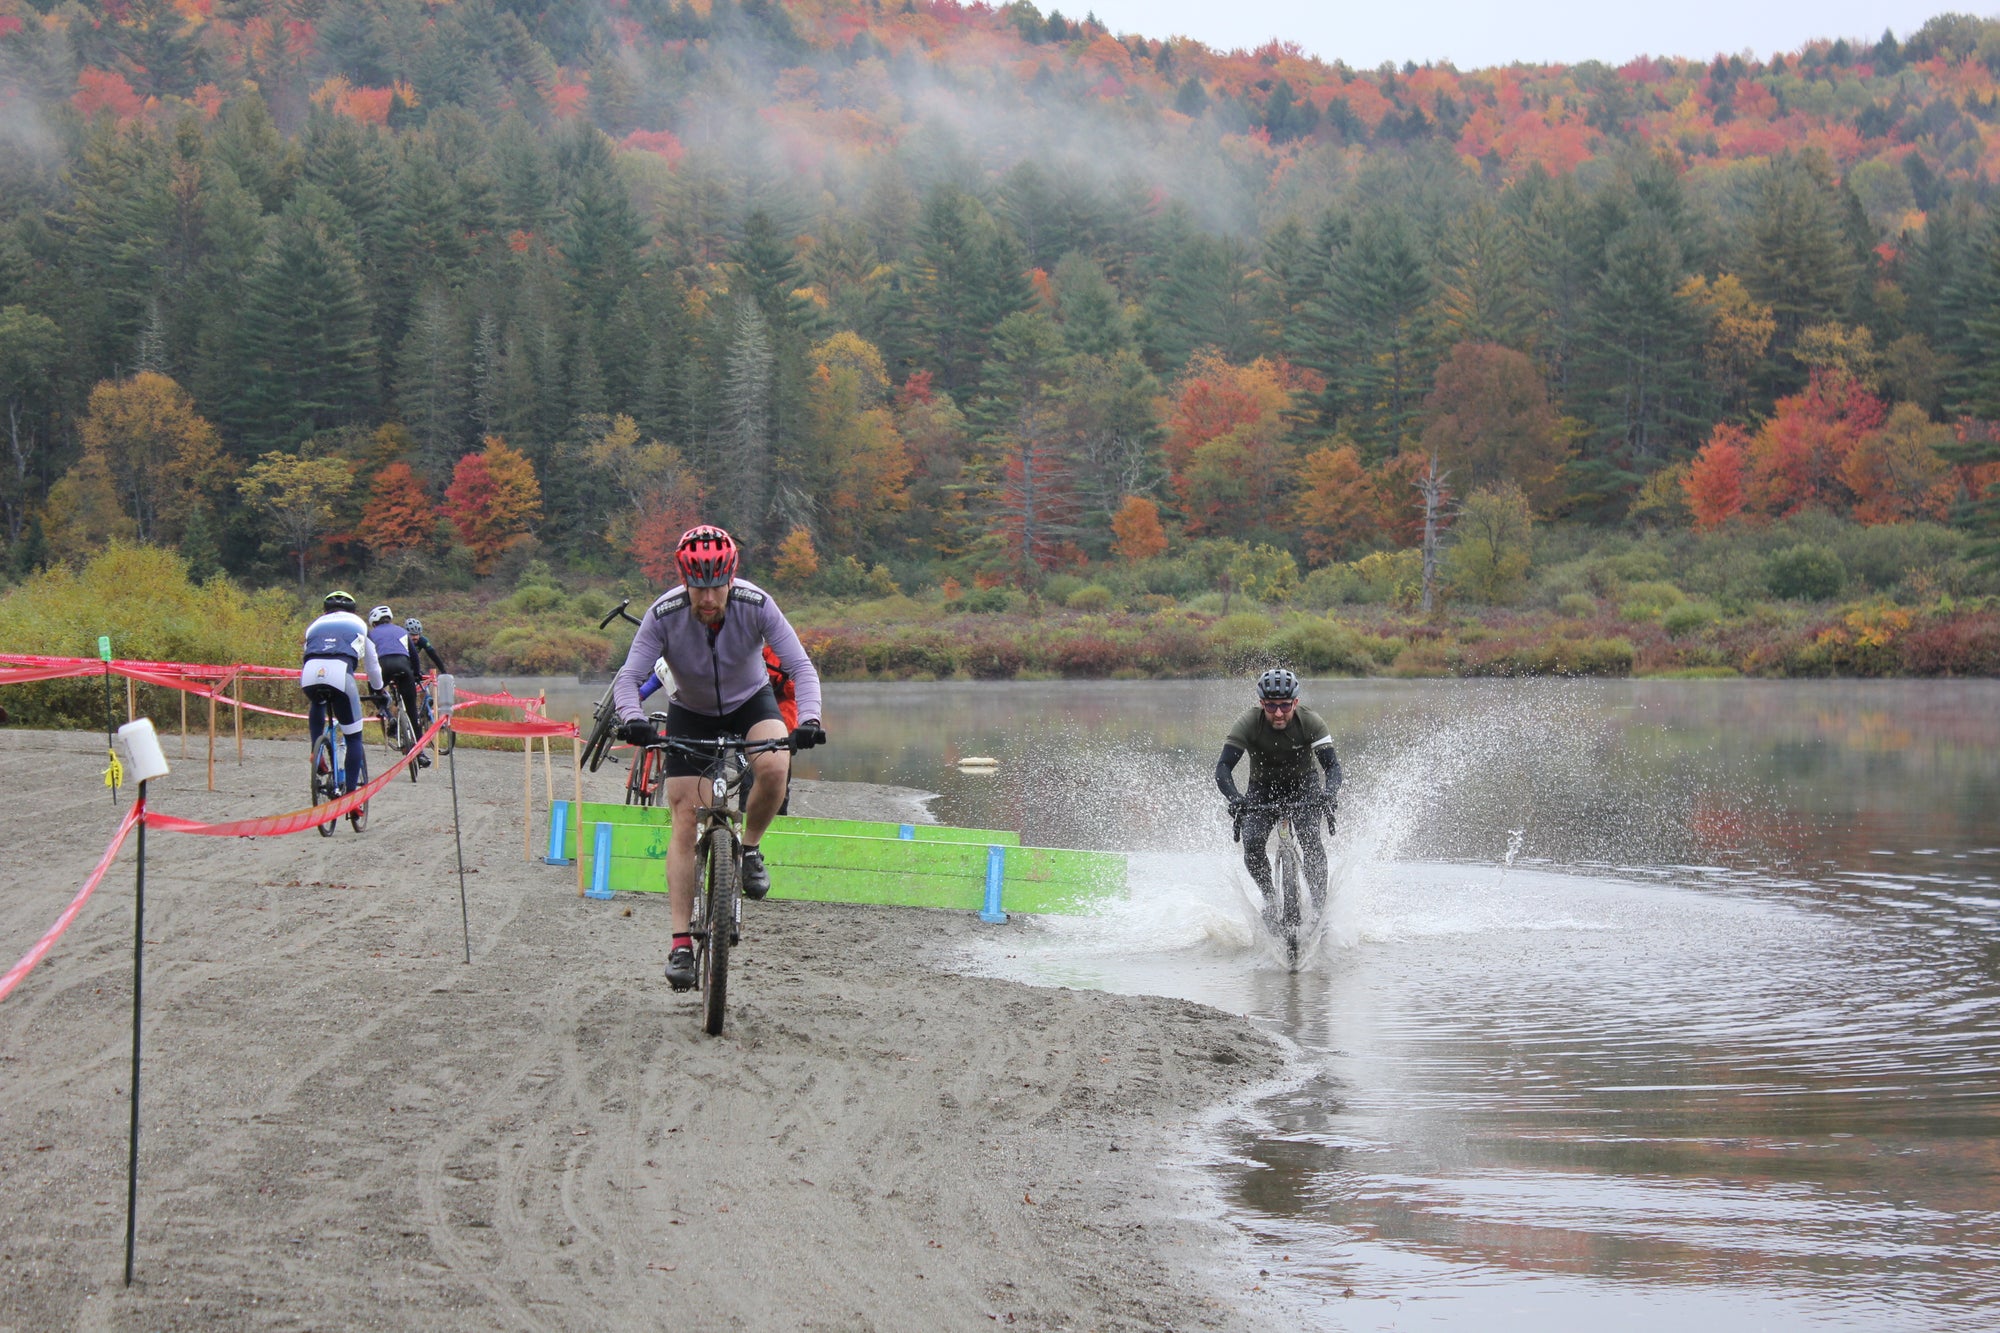 Two bike riders racing cyclocross through sand and water